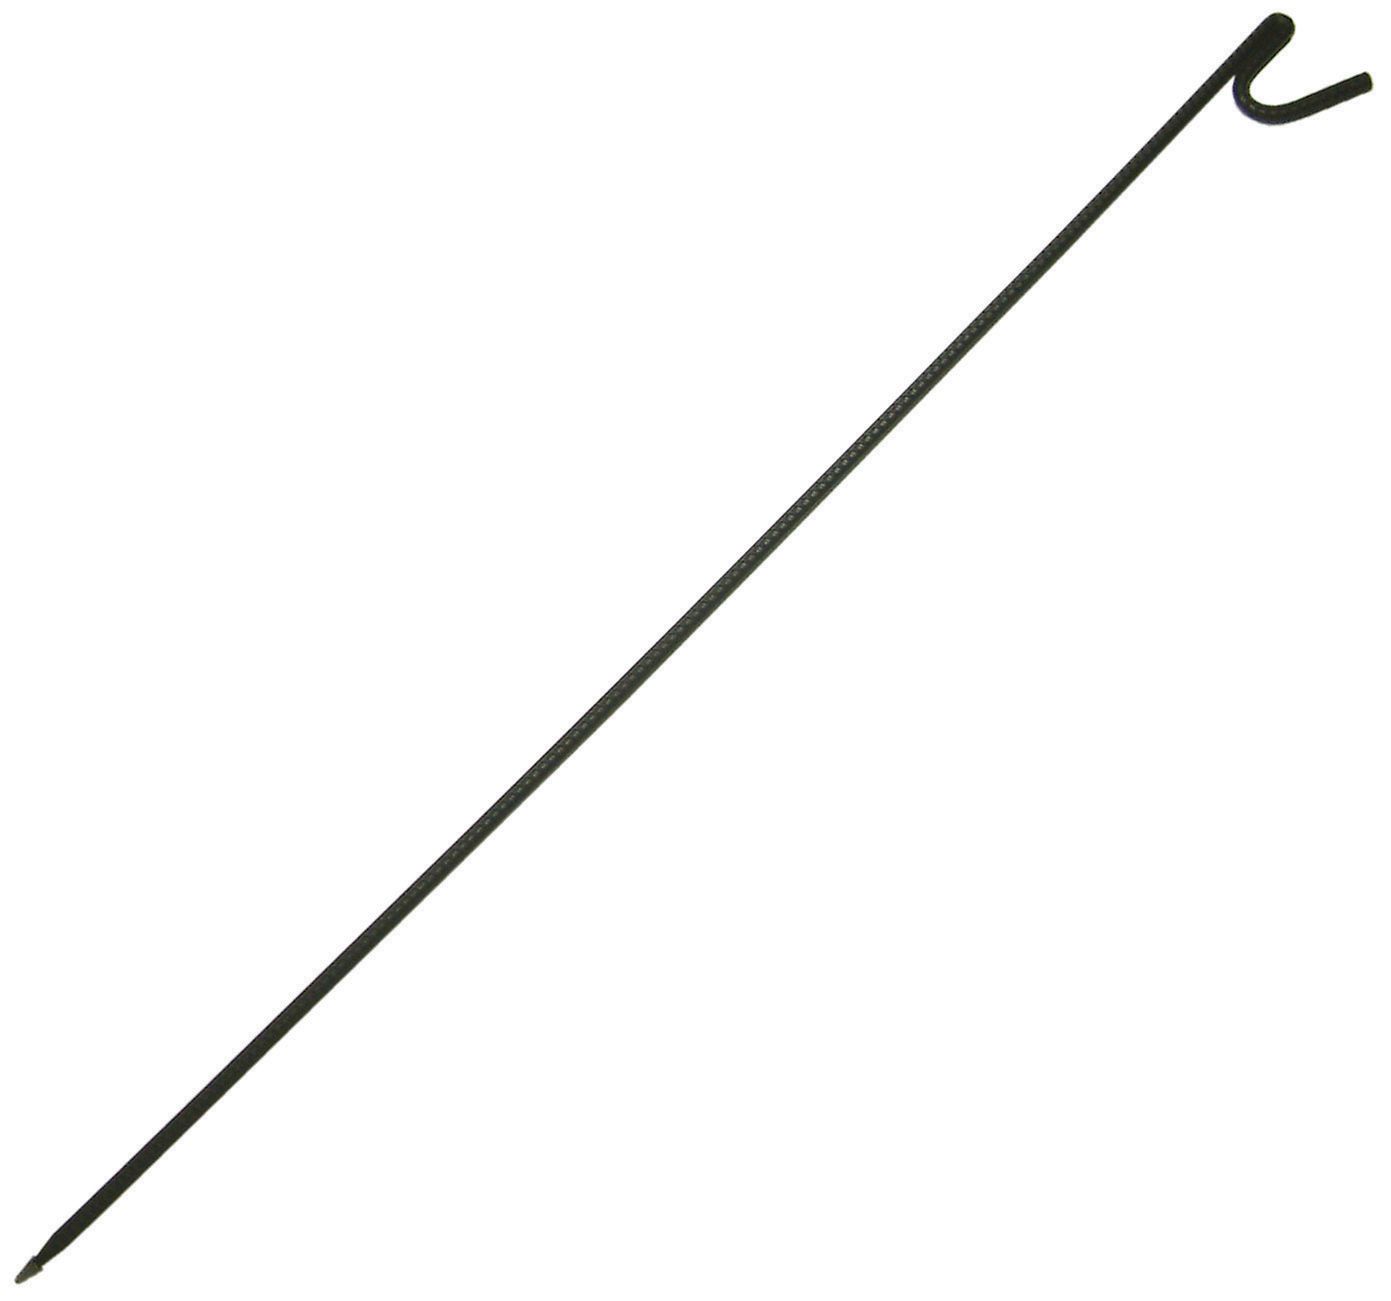 Fencing Pin 12mm x 1300mm Pack of 5